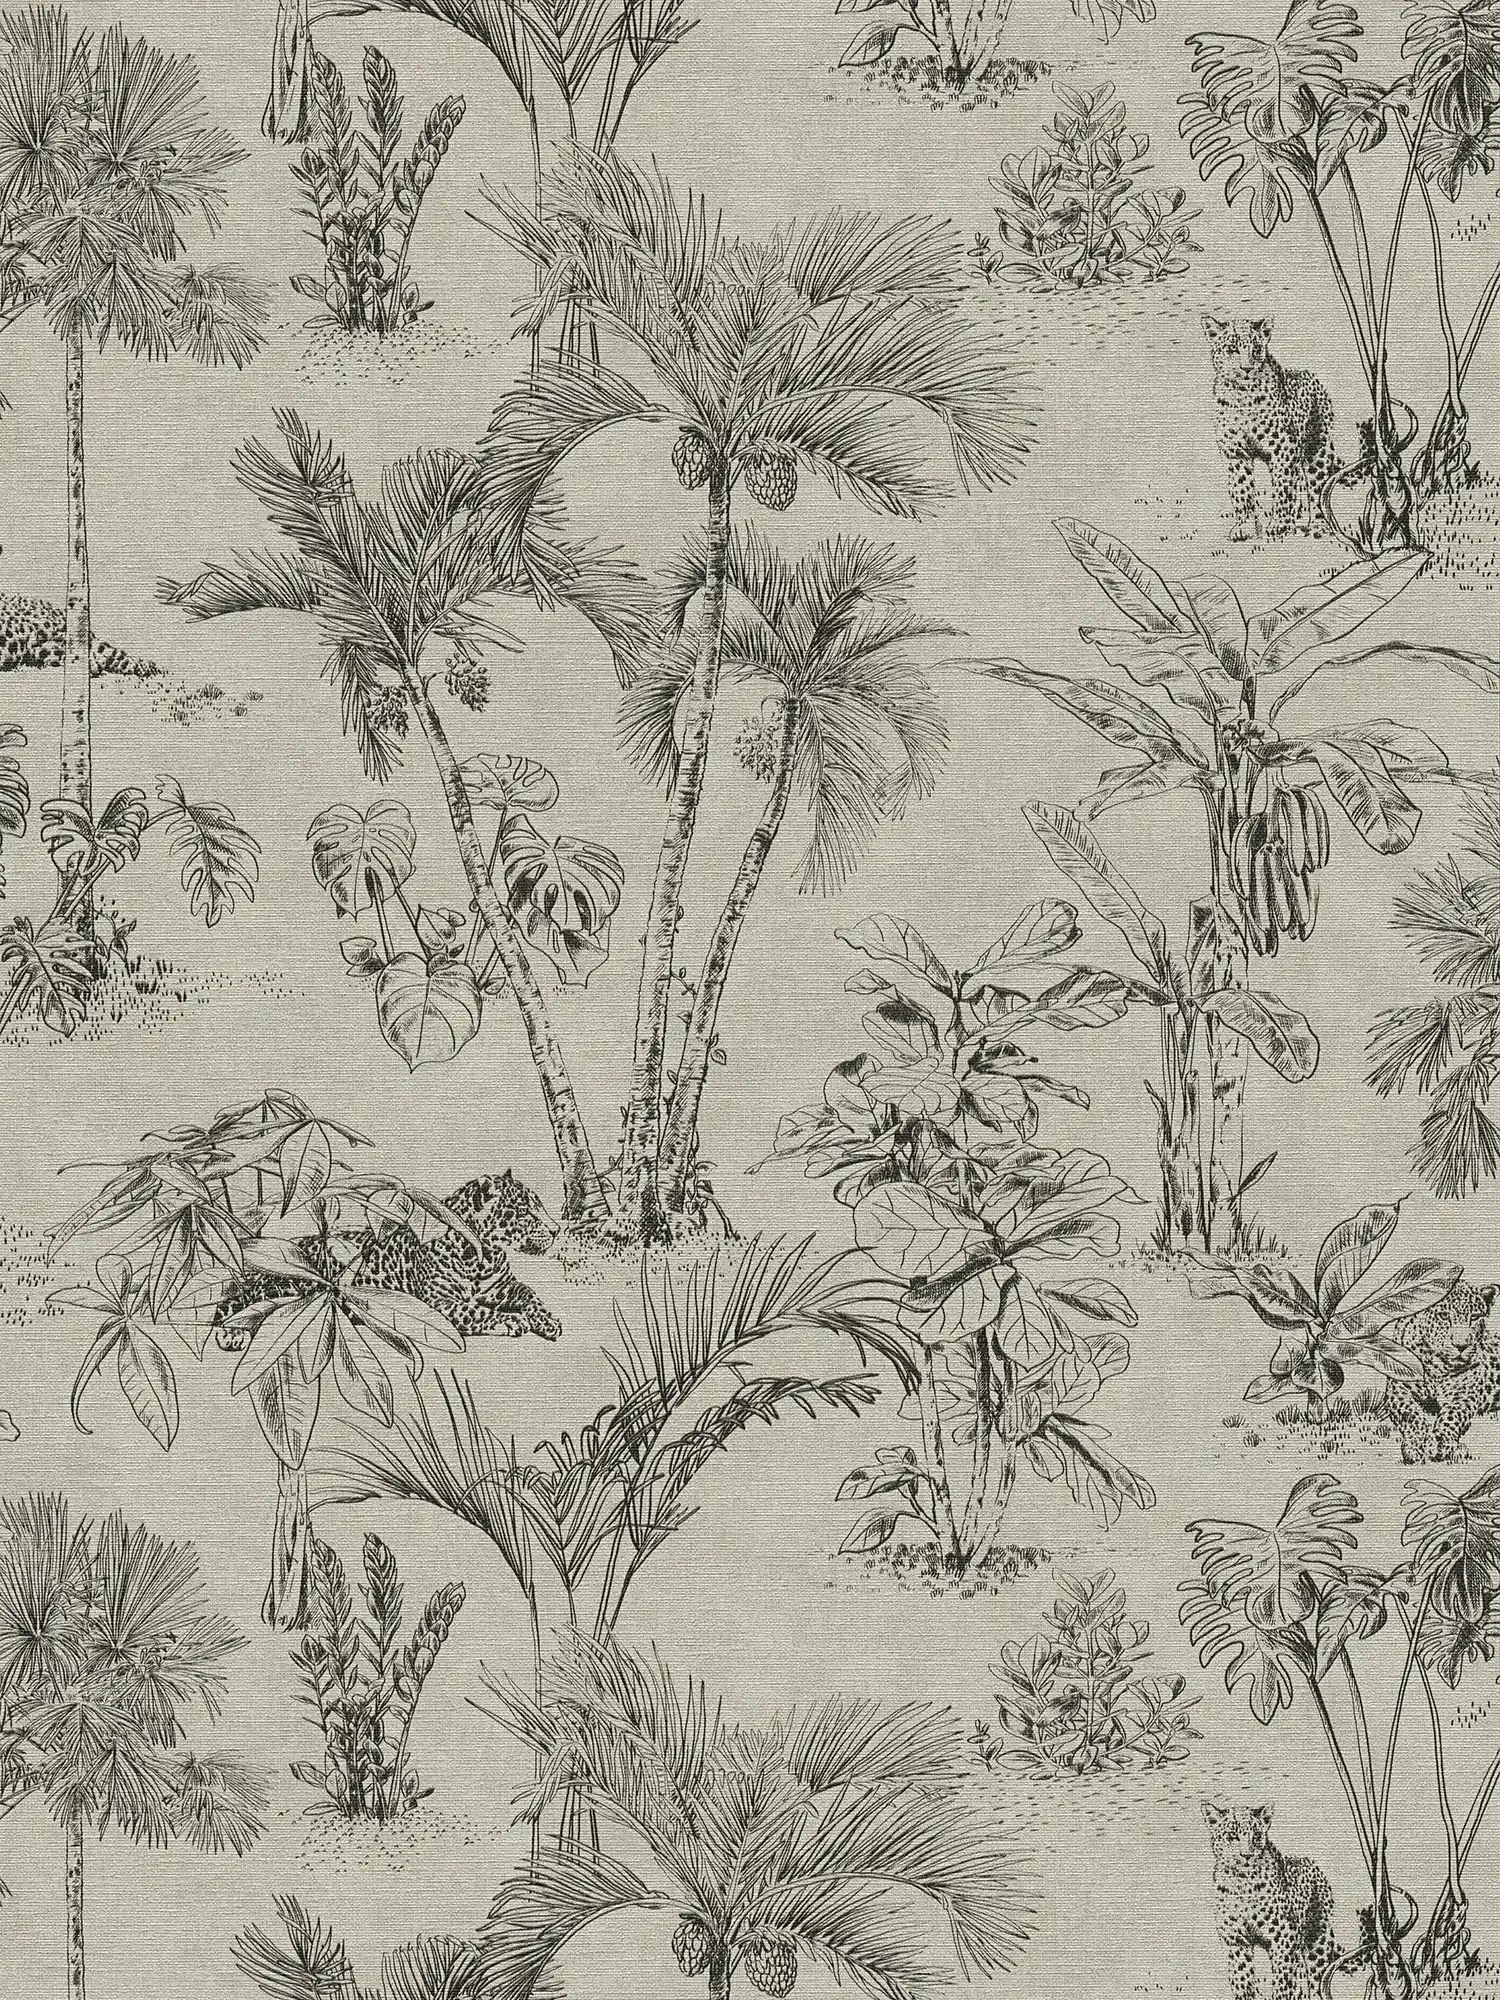 Wallpaper jungle pattern palm trees in colonial style - brown, black
